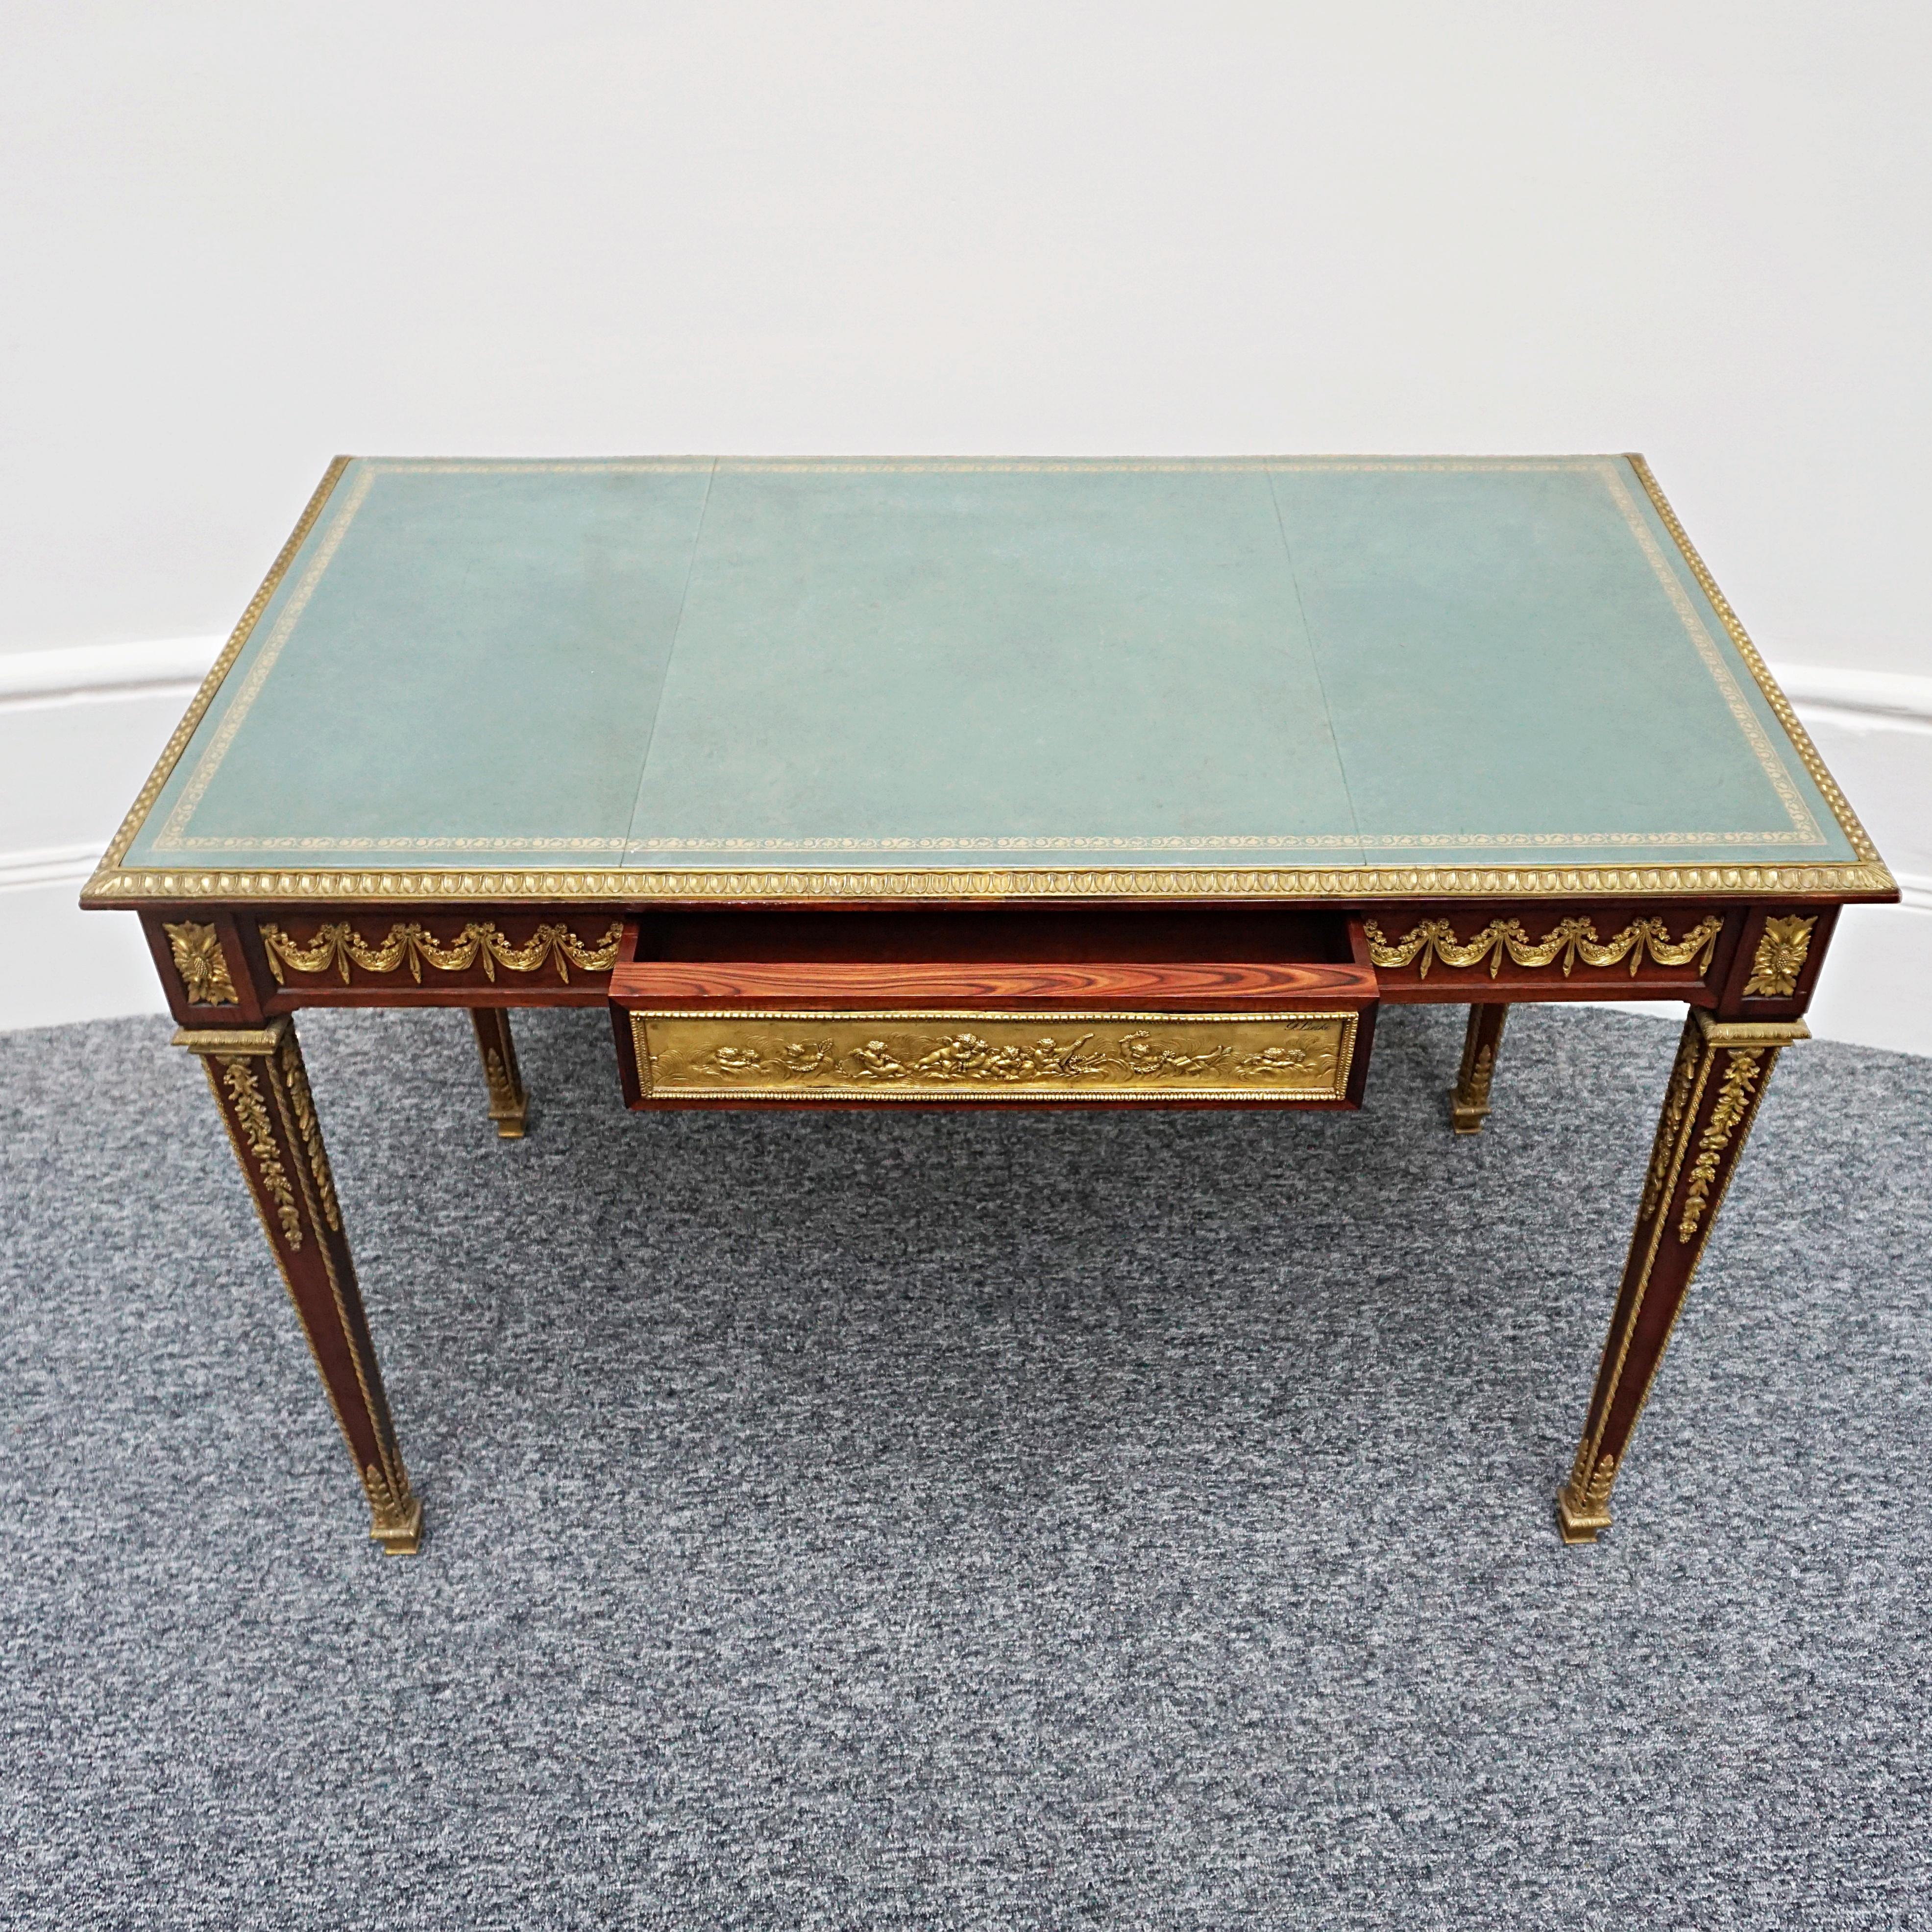 Louis XVI Style Gilt-Bronze Mounted Kingwood Writing Table by Francois Linke For Sale 6